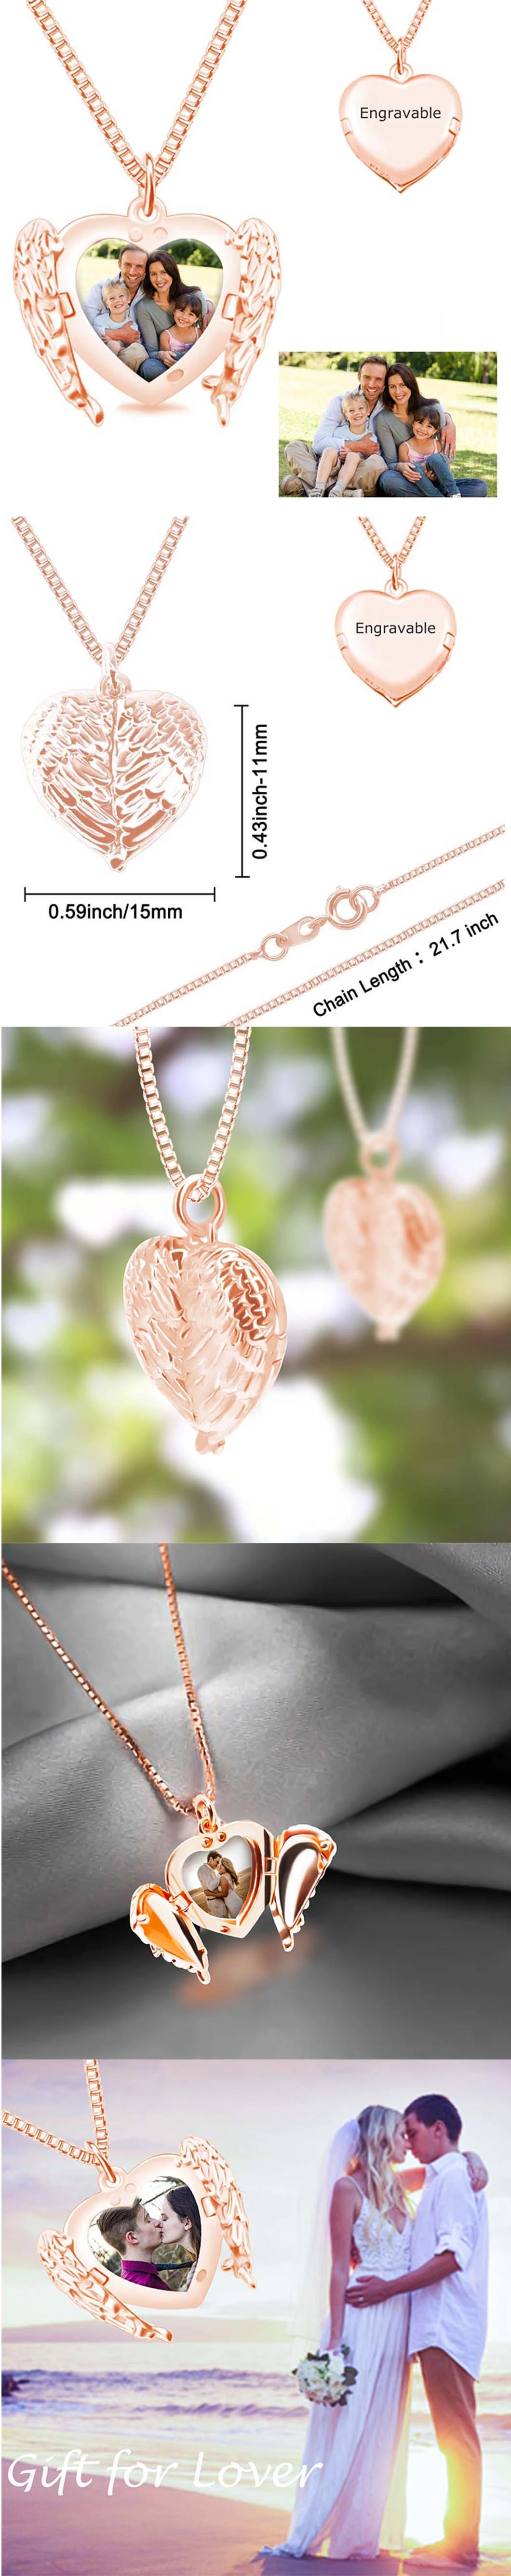 Necklace Pendant Romantic Angel Wings Fashion Heart - Shaped Jewelry Necklaces